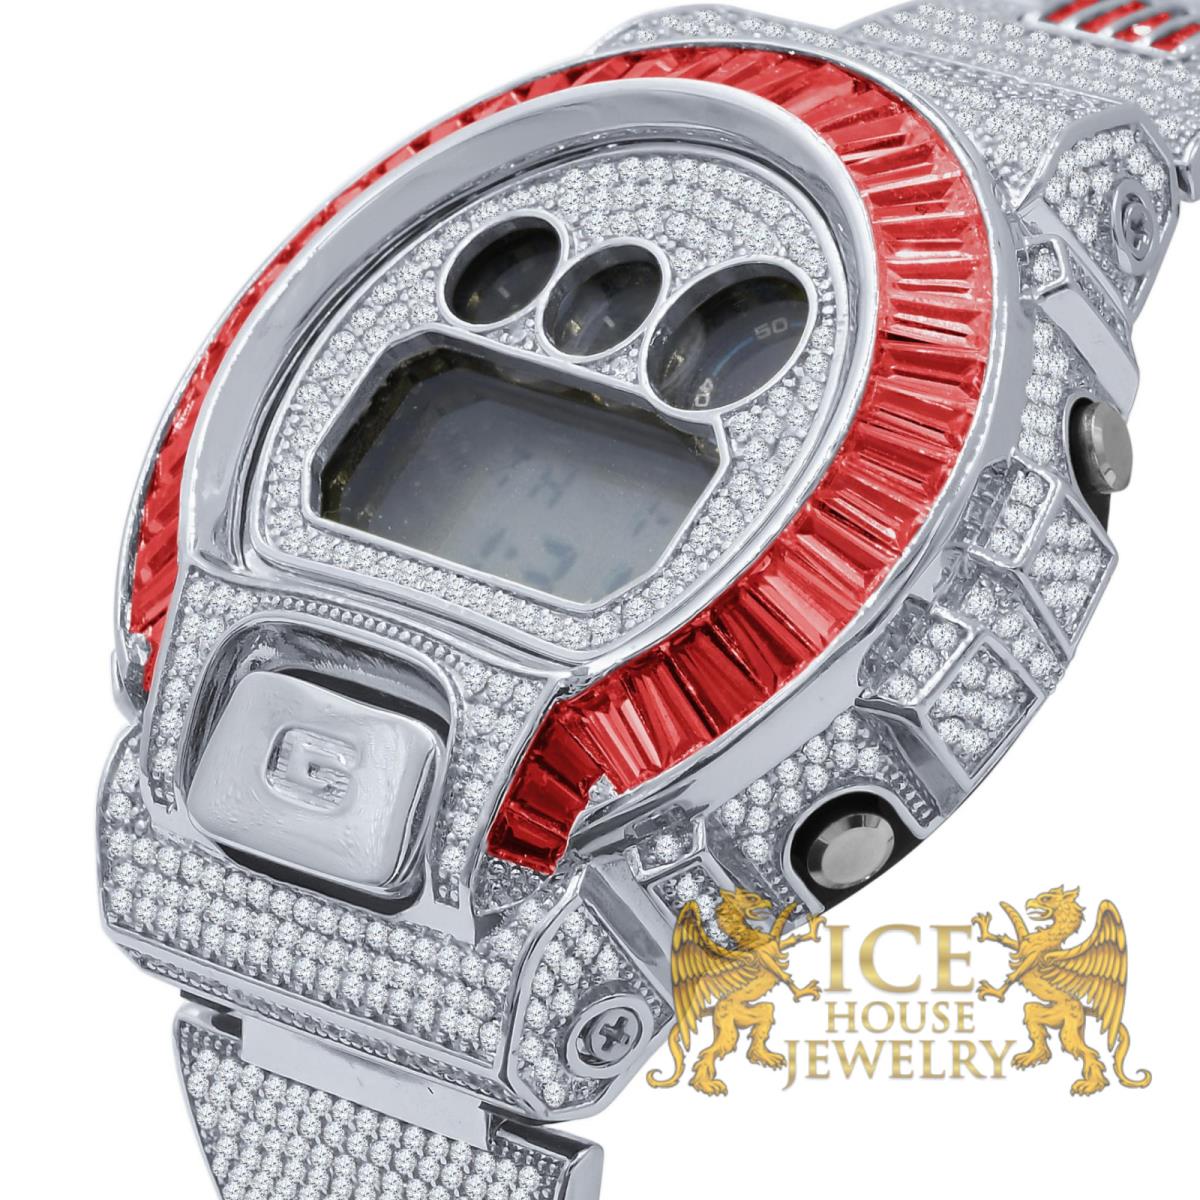 Icy Red Ruby Baguette On White Gold Finish Casio G-shock DW-6900 Watch